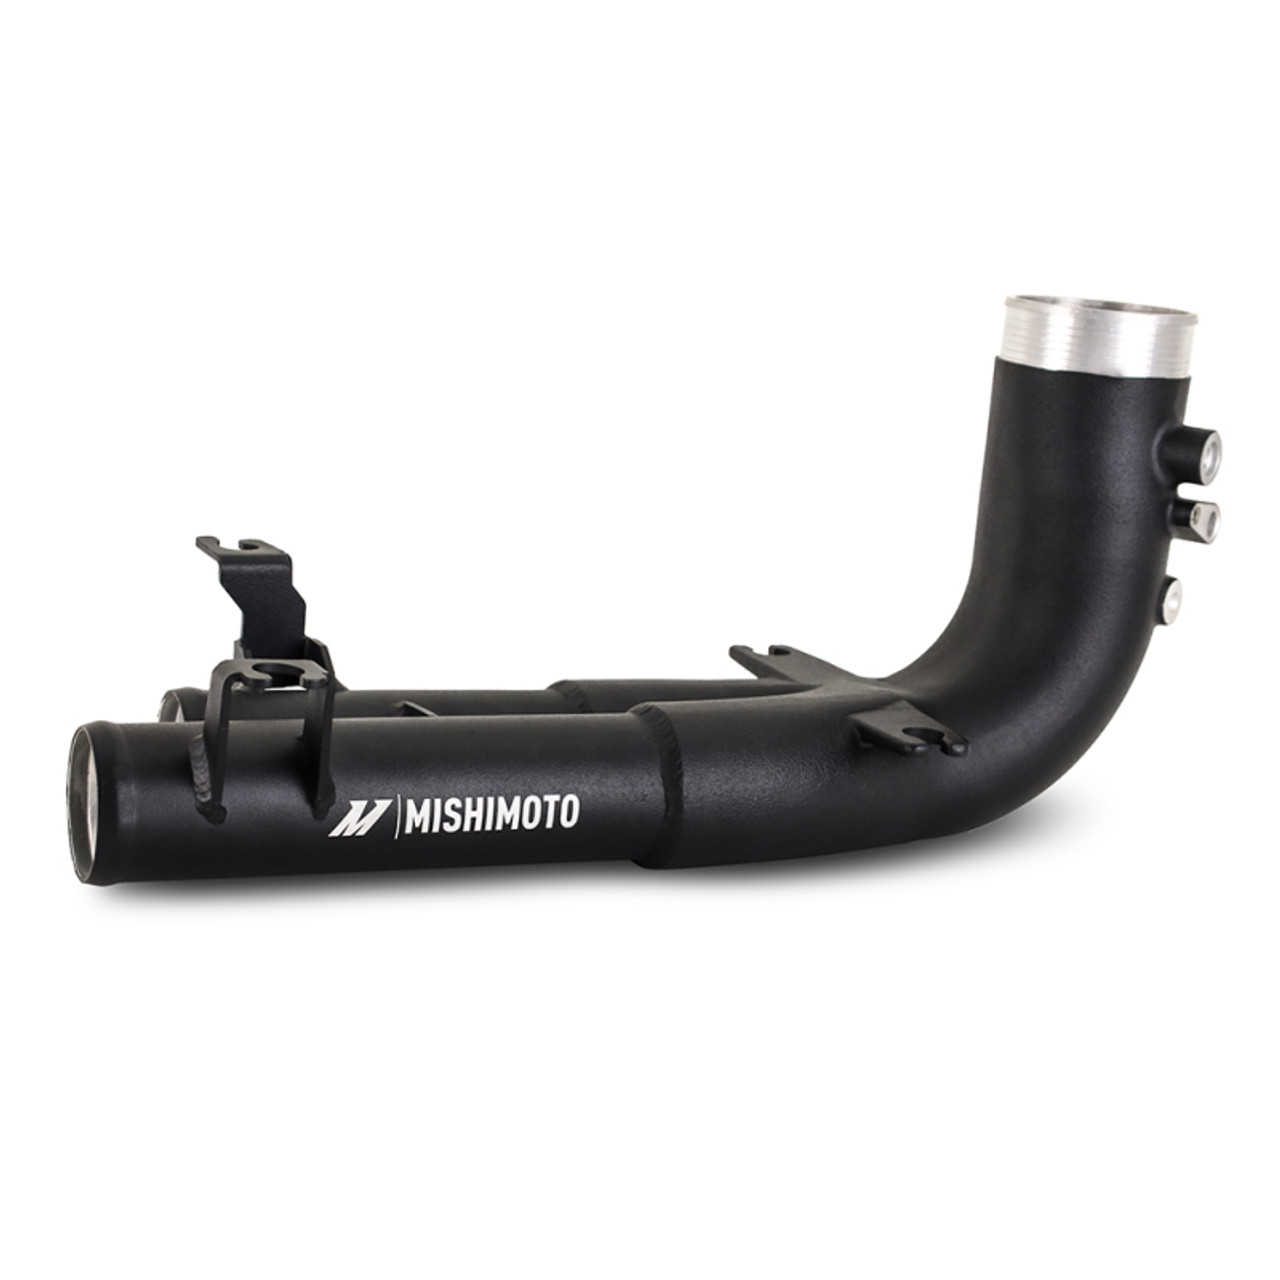 Mishimoto 2021+ BMW G8X M3/M4 Hot Side Intercooler Charge Pipe Kit - MMICP-G80-21 User 1